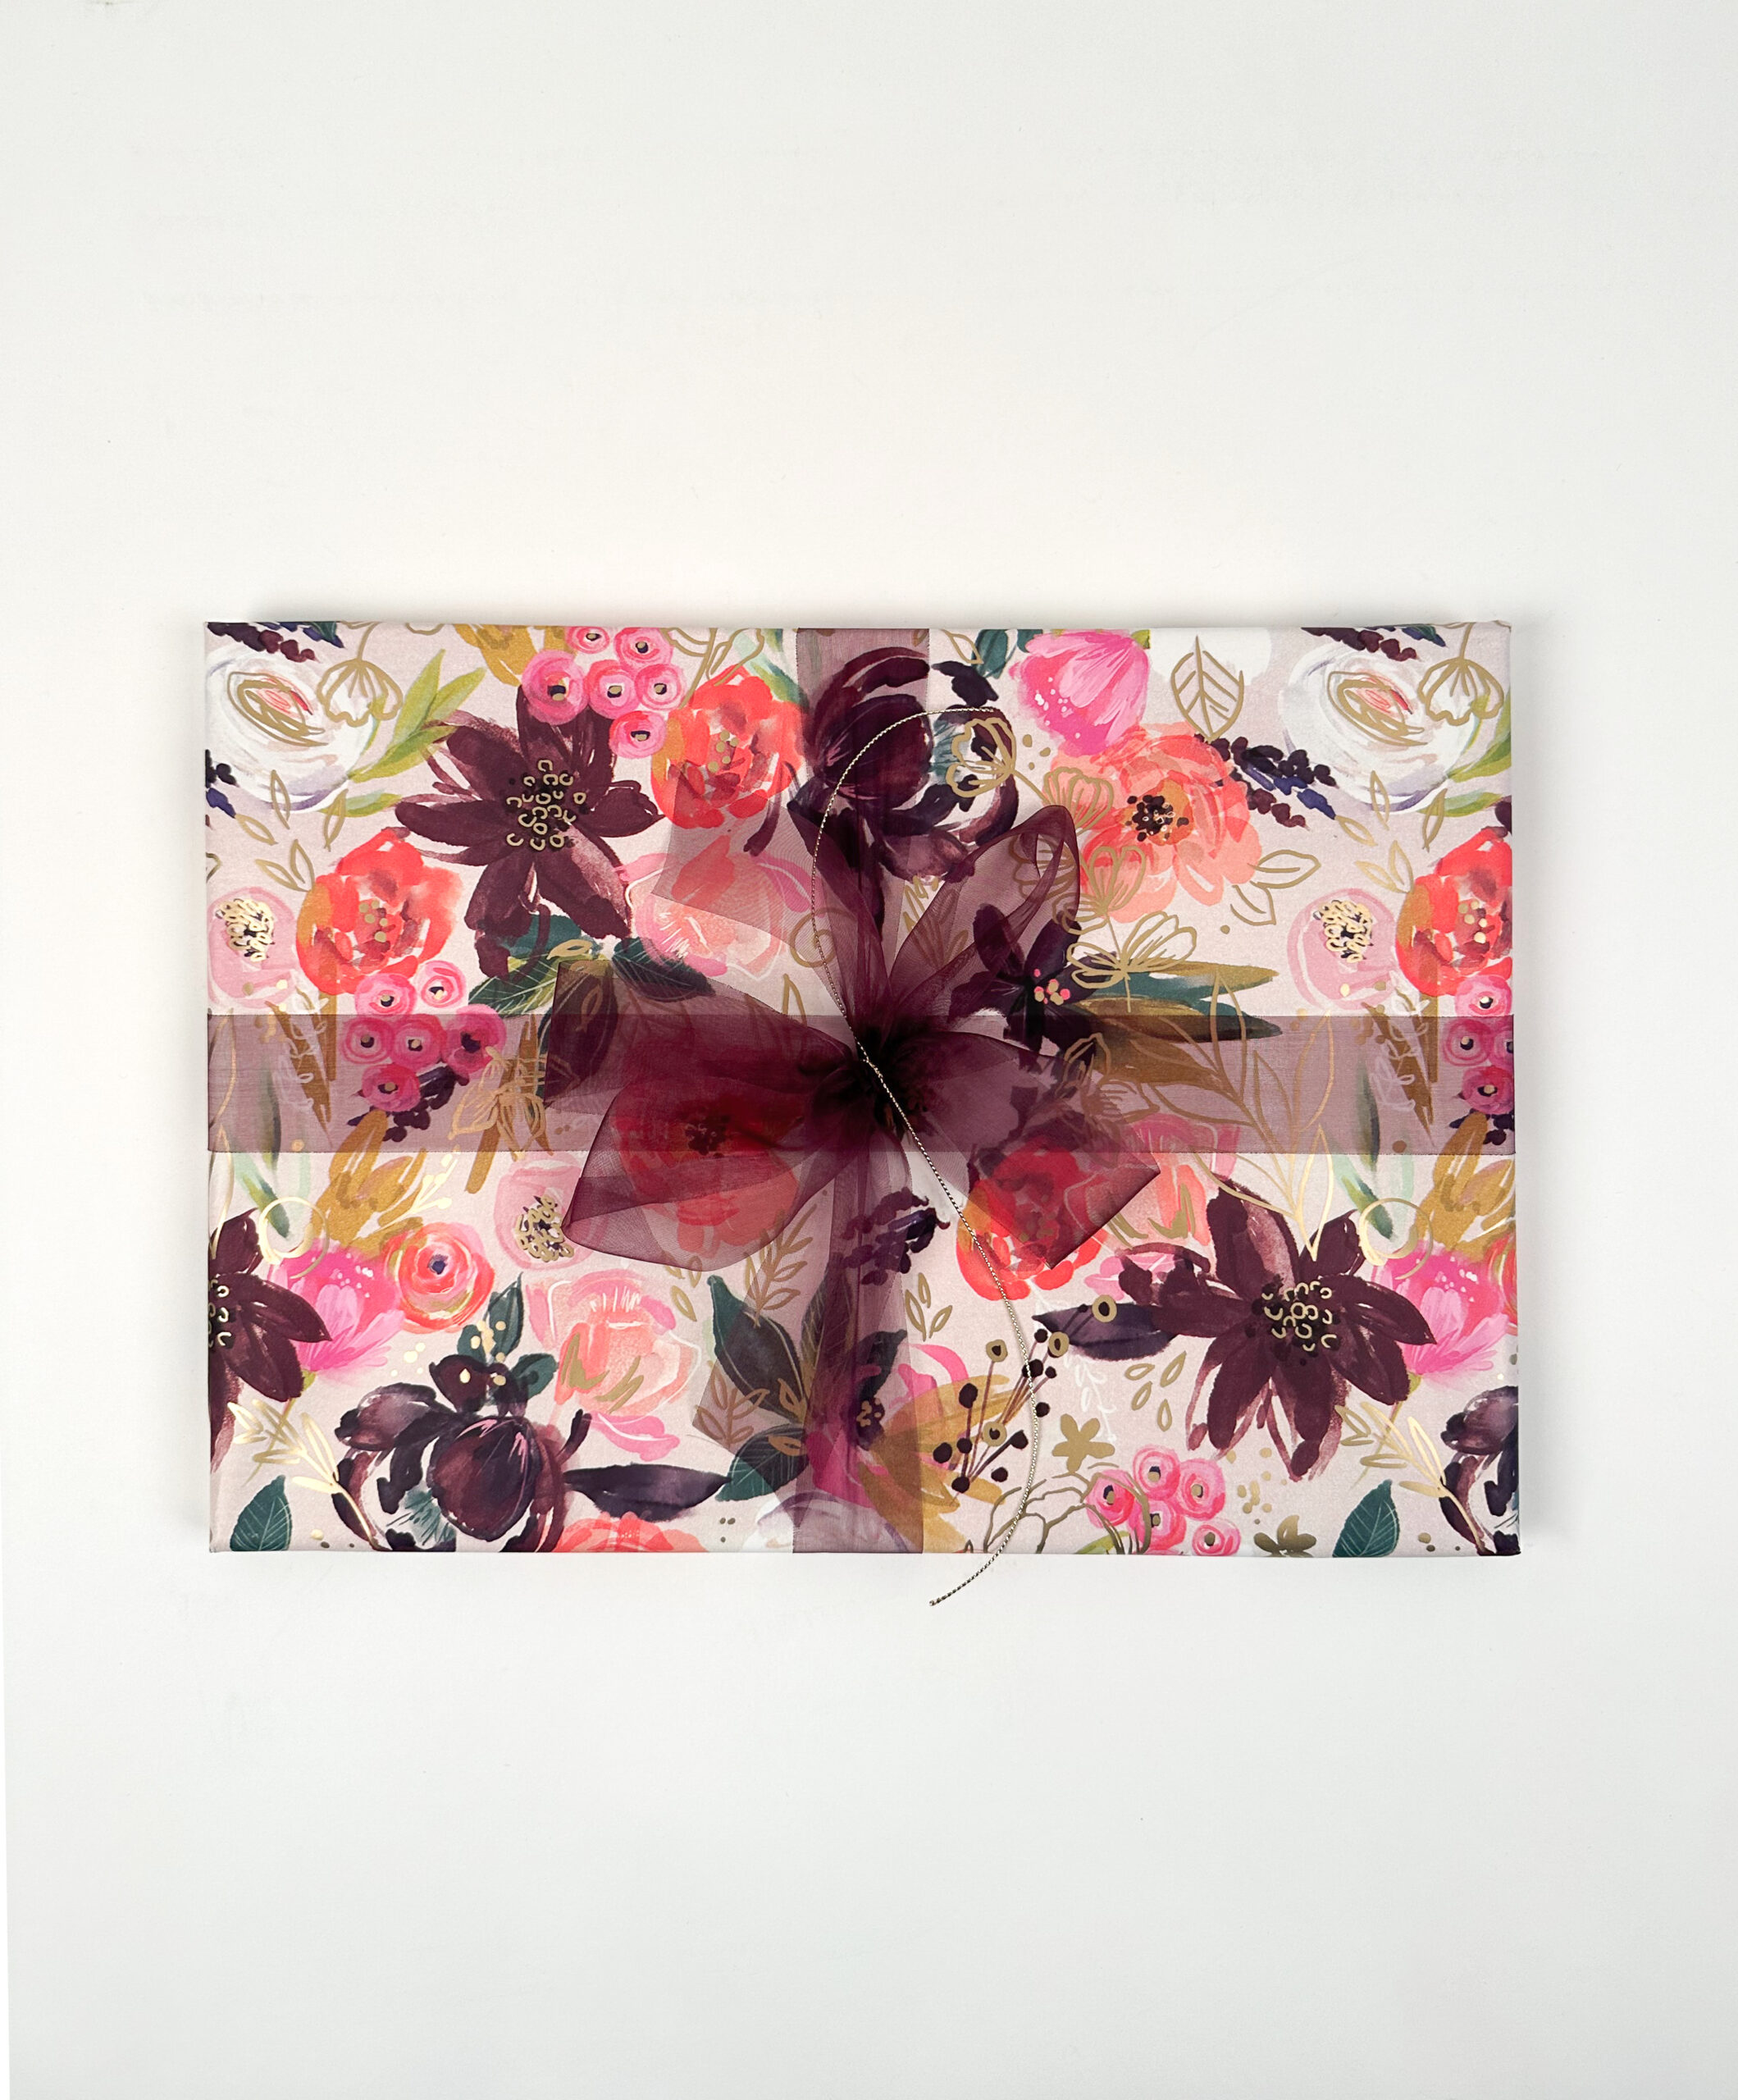 PRINTED GLOSS WRAPPING PAPER FLORAL FLAIR